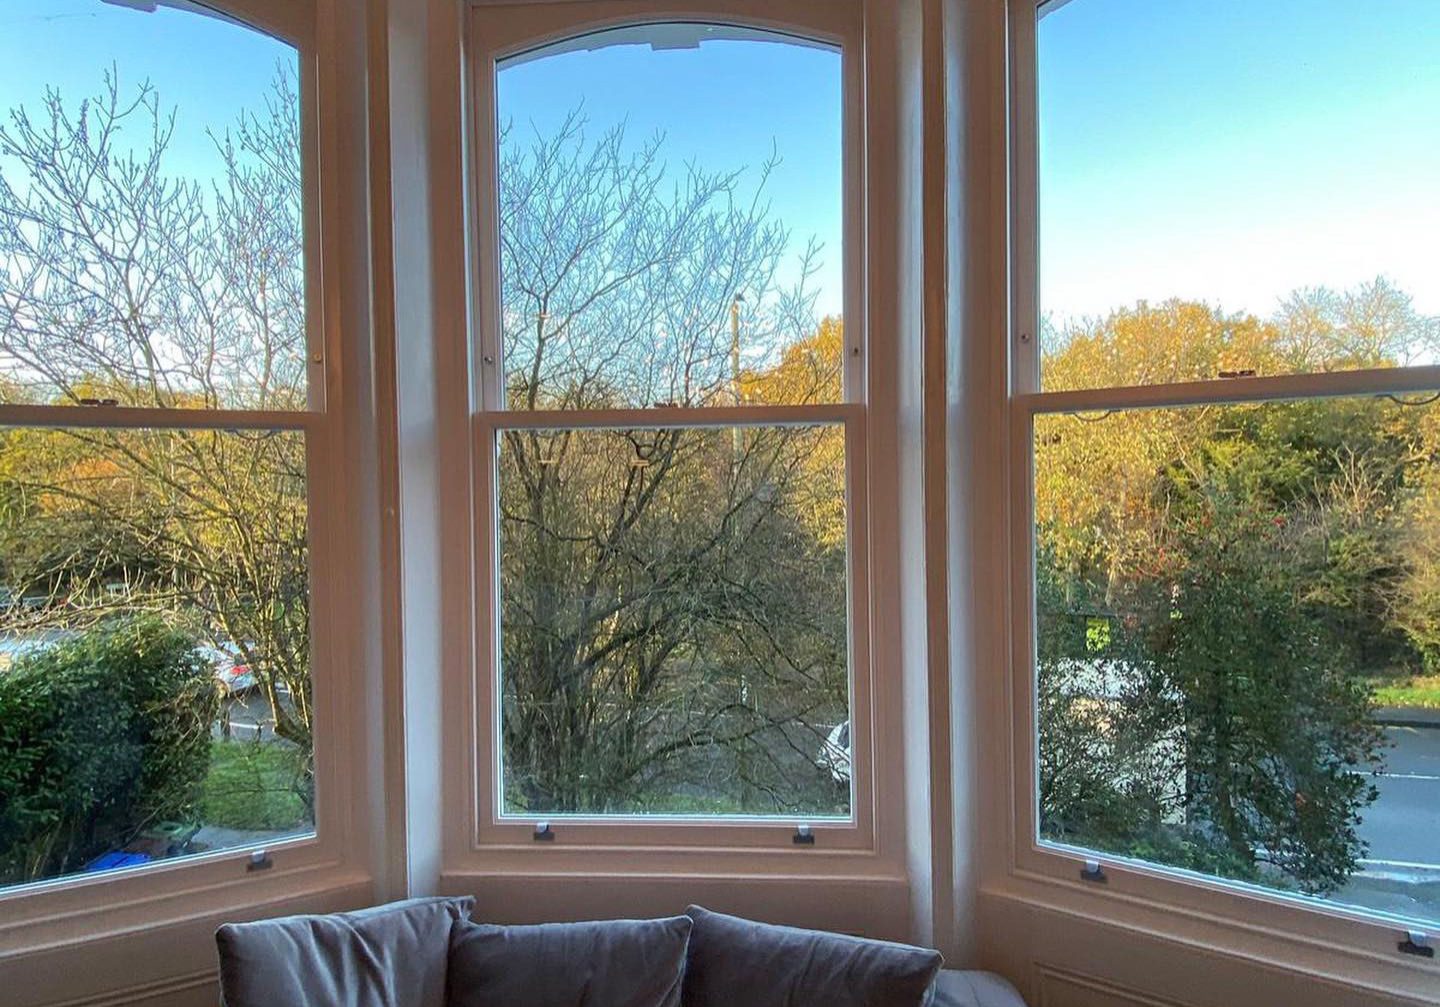 Bay window view from the inside